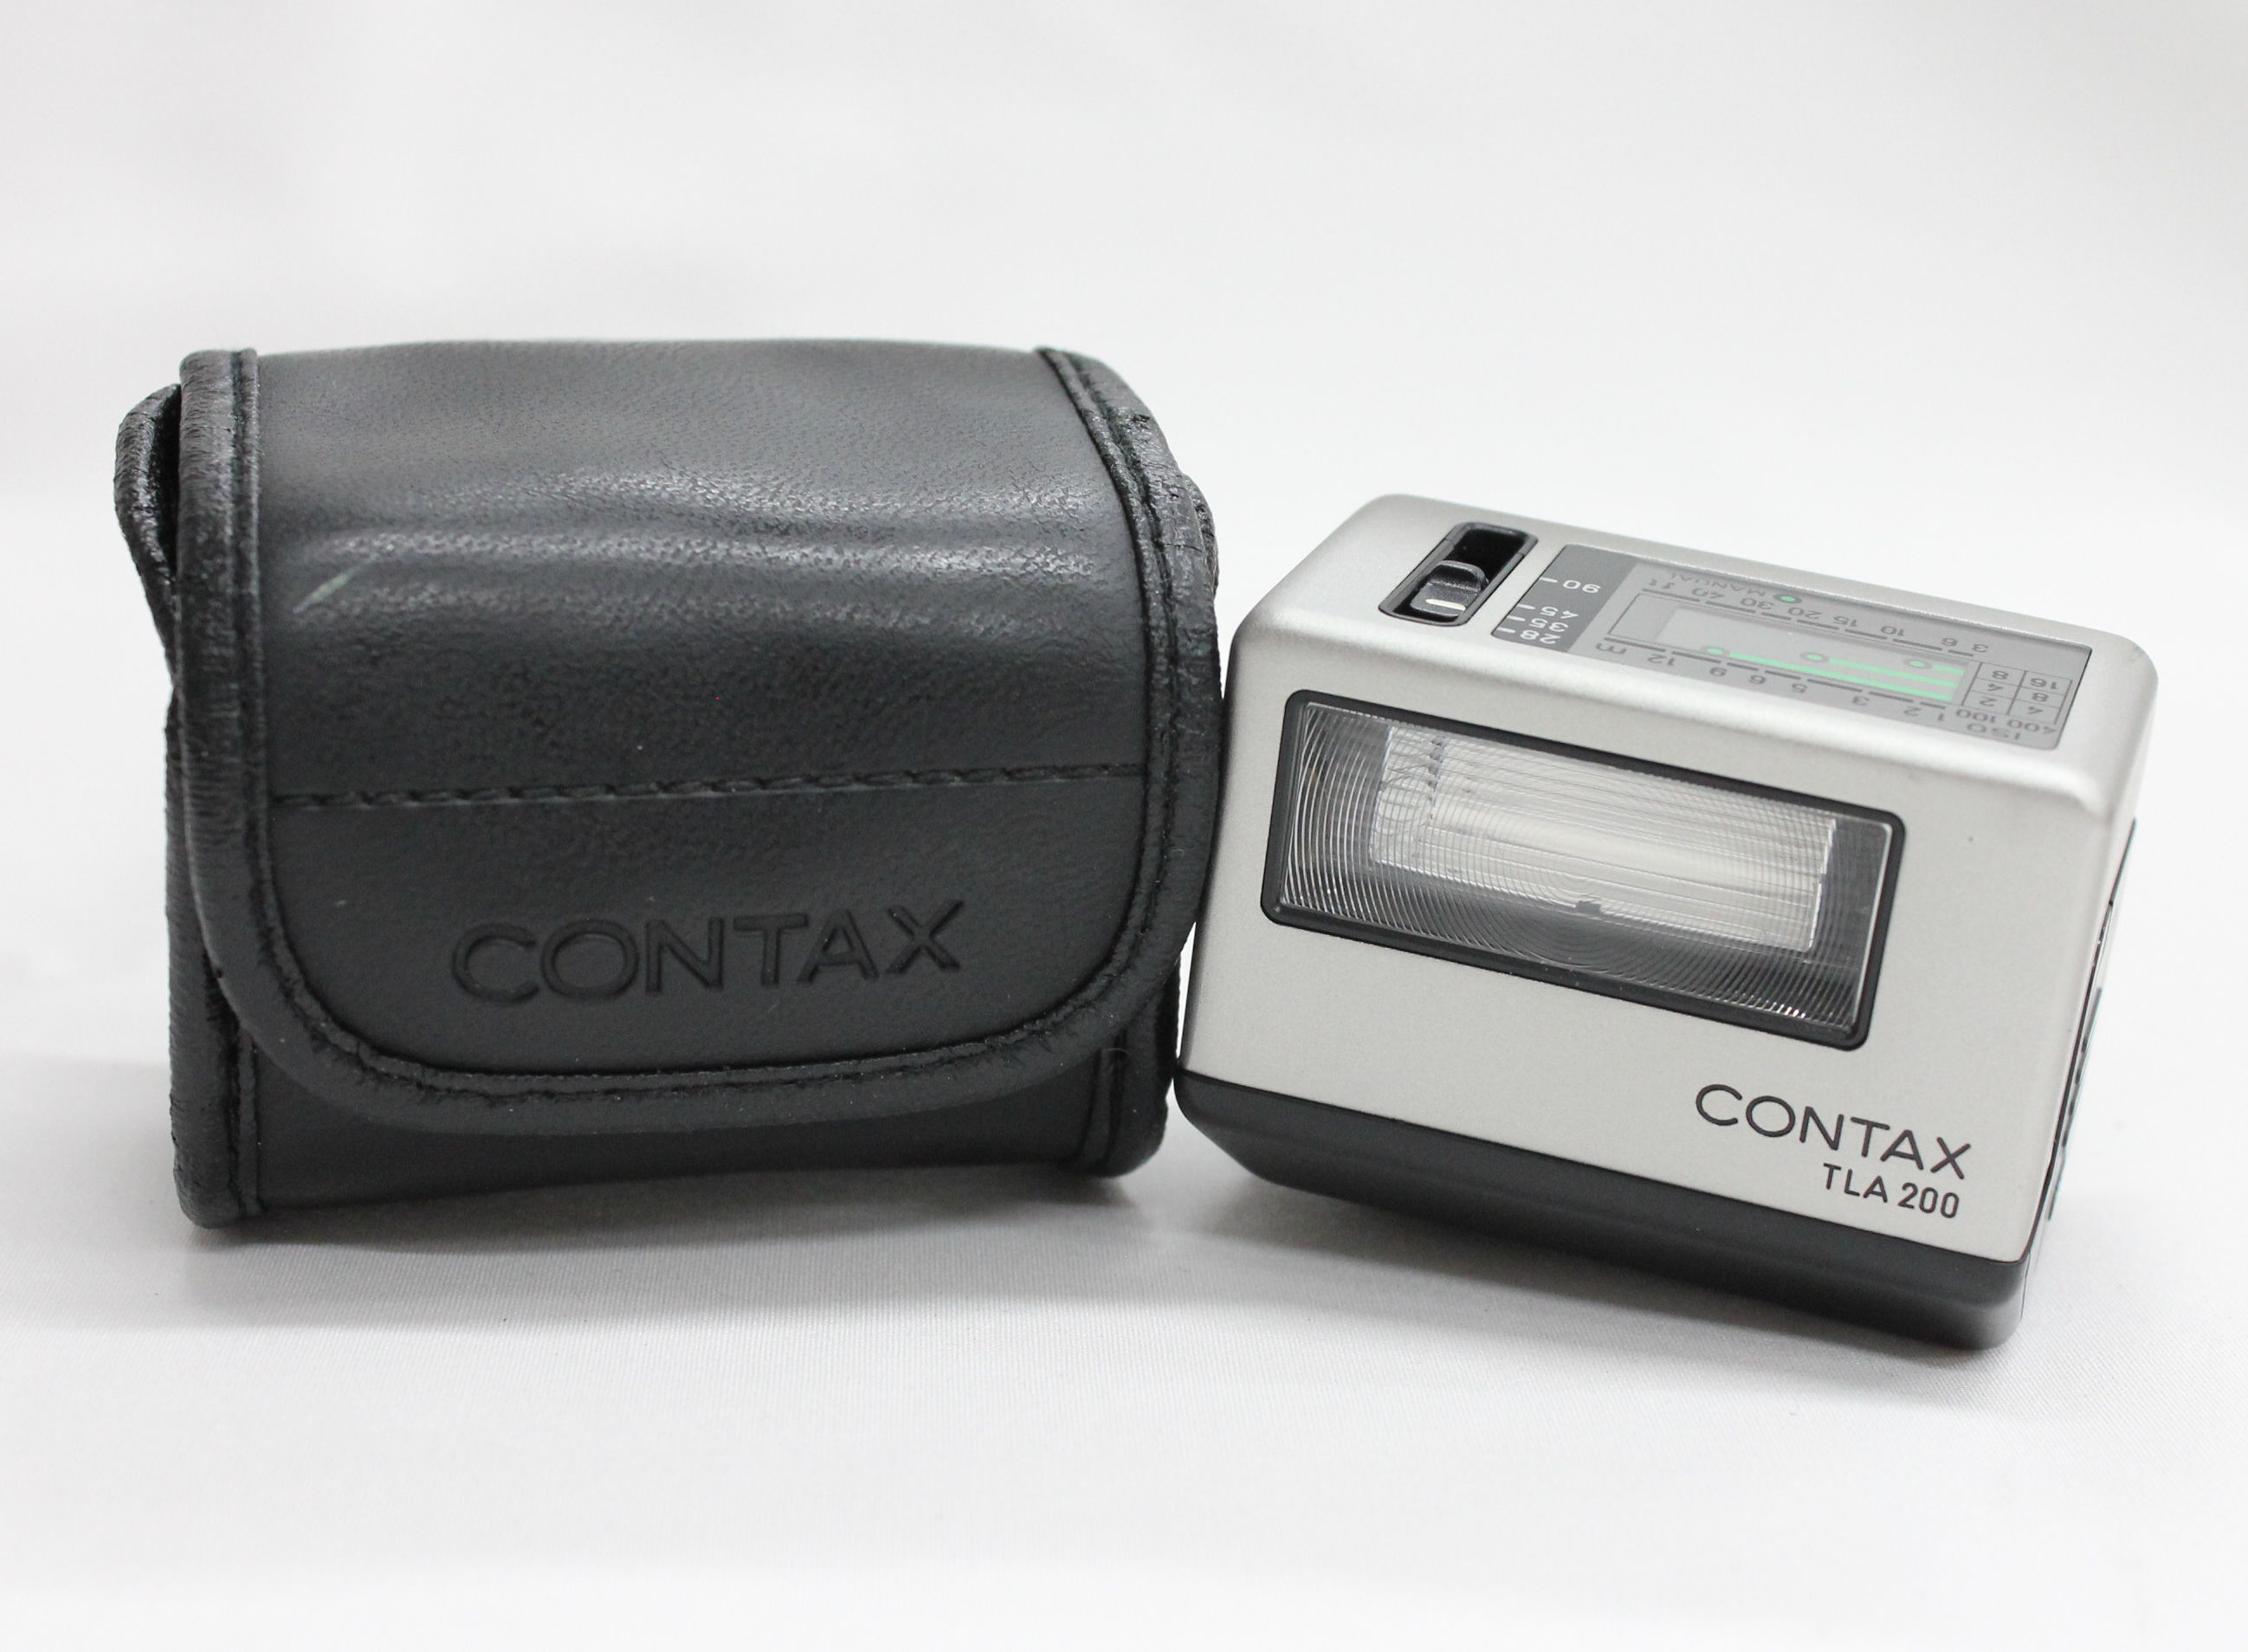  Contax TLA 200 Shoe Mount Flash w / Leather Case for G1 G2 from Japan Photo 0